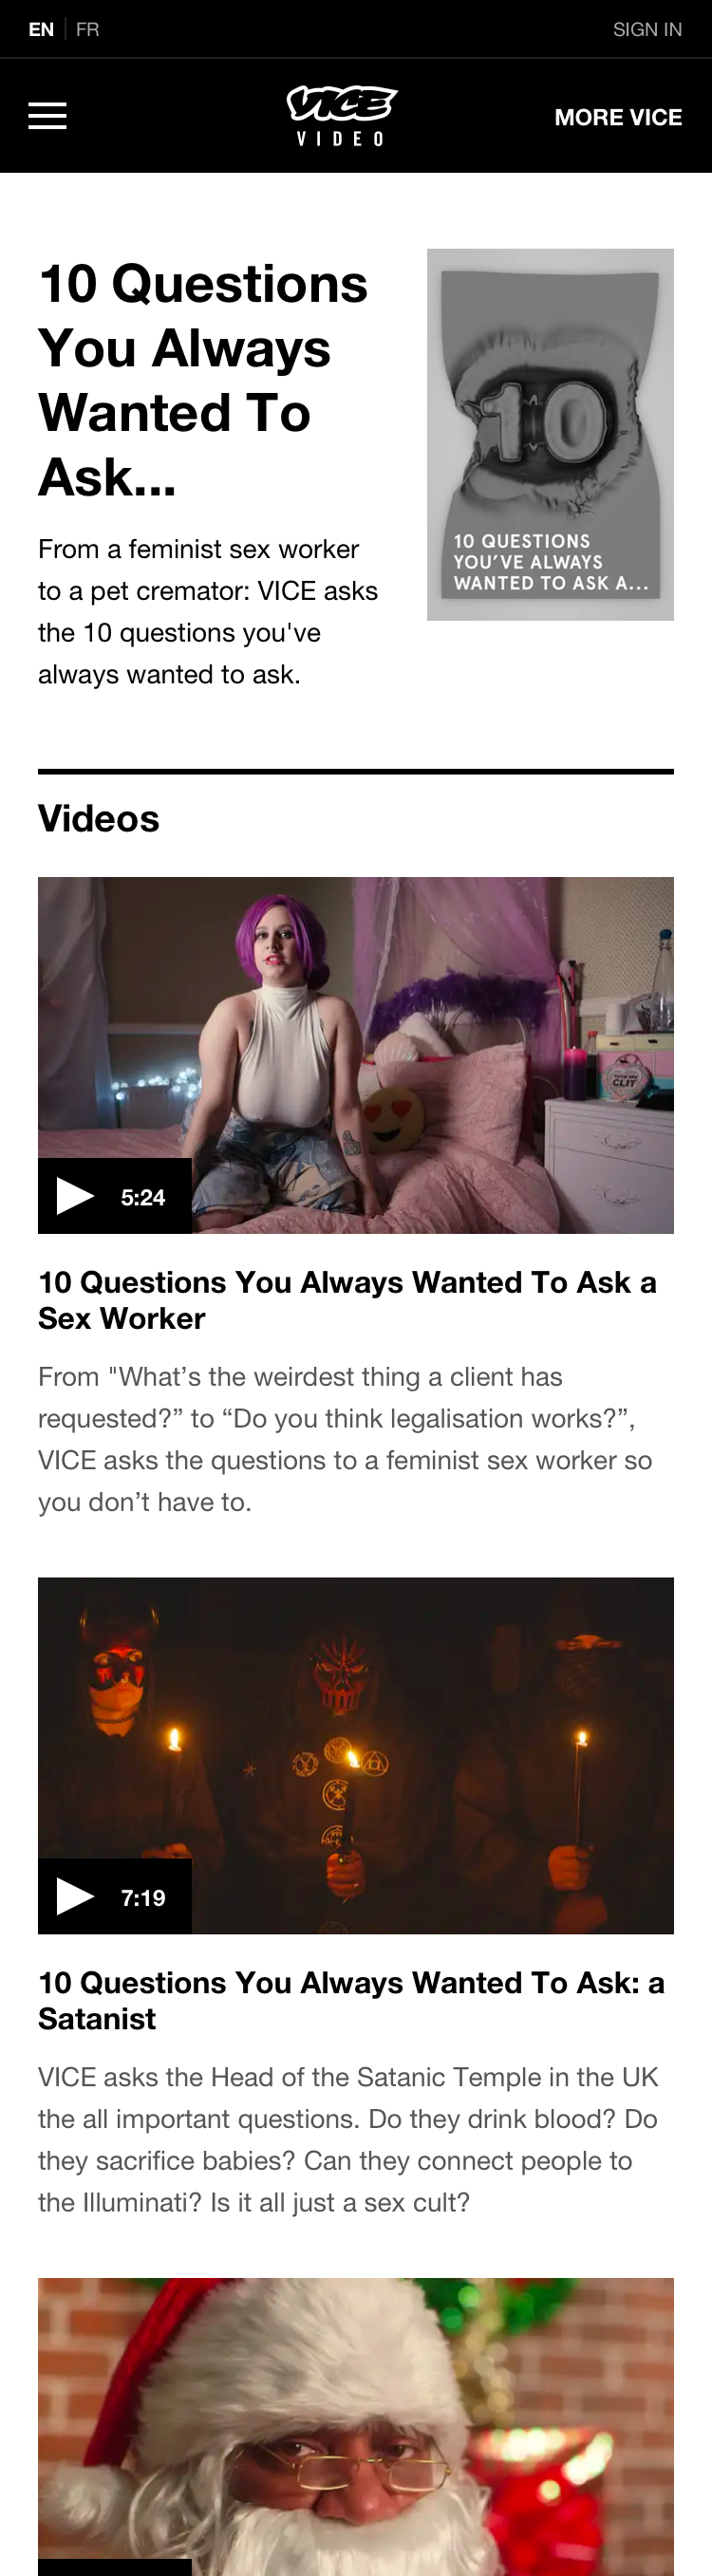 A show page on VICE Video